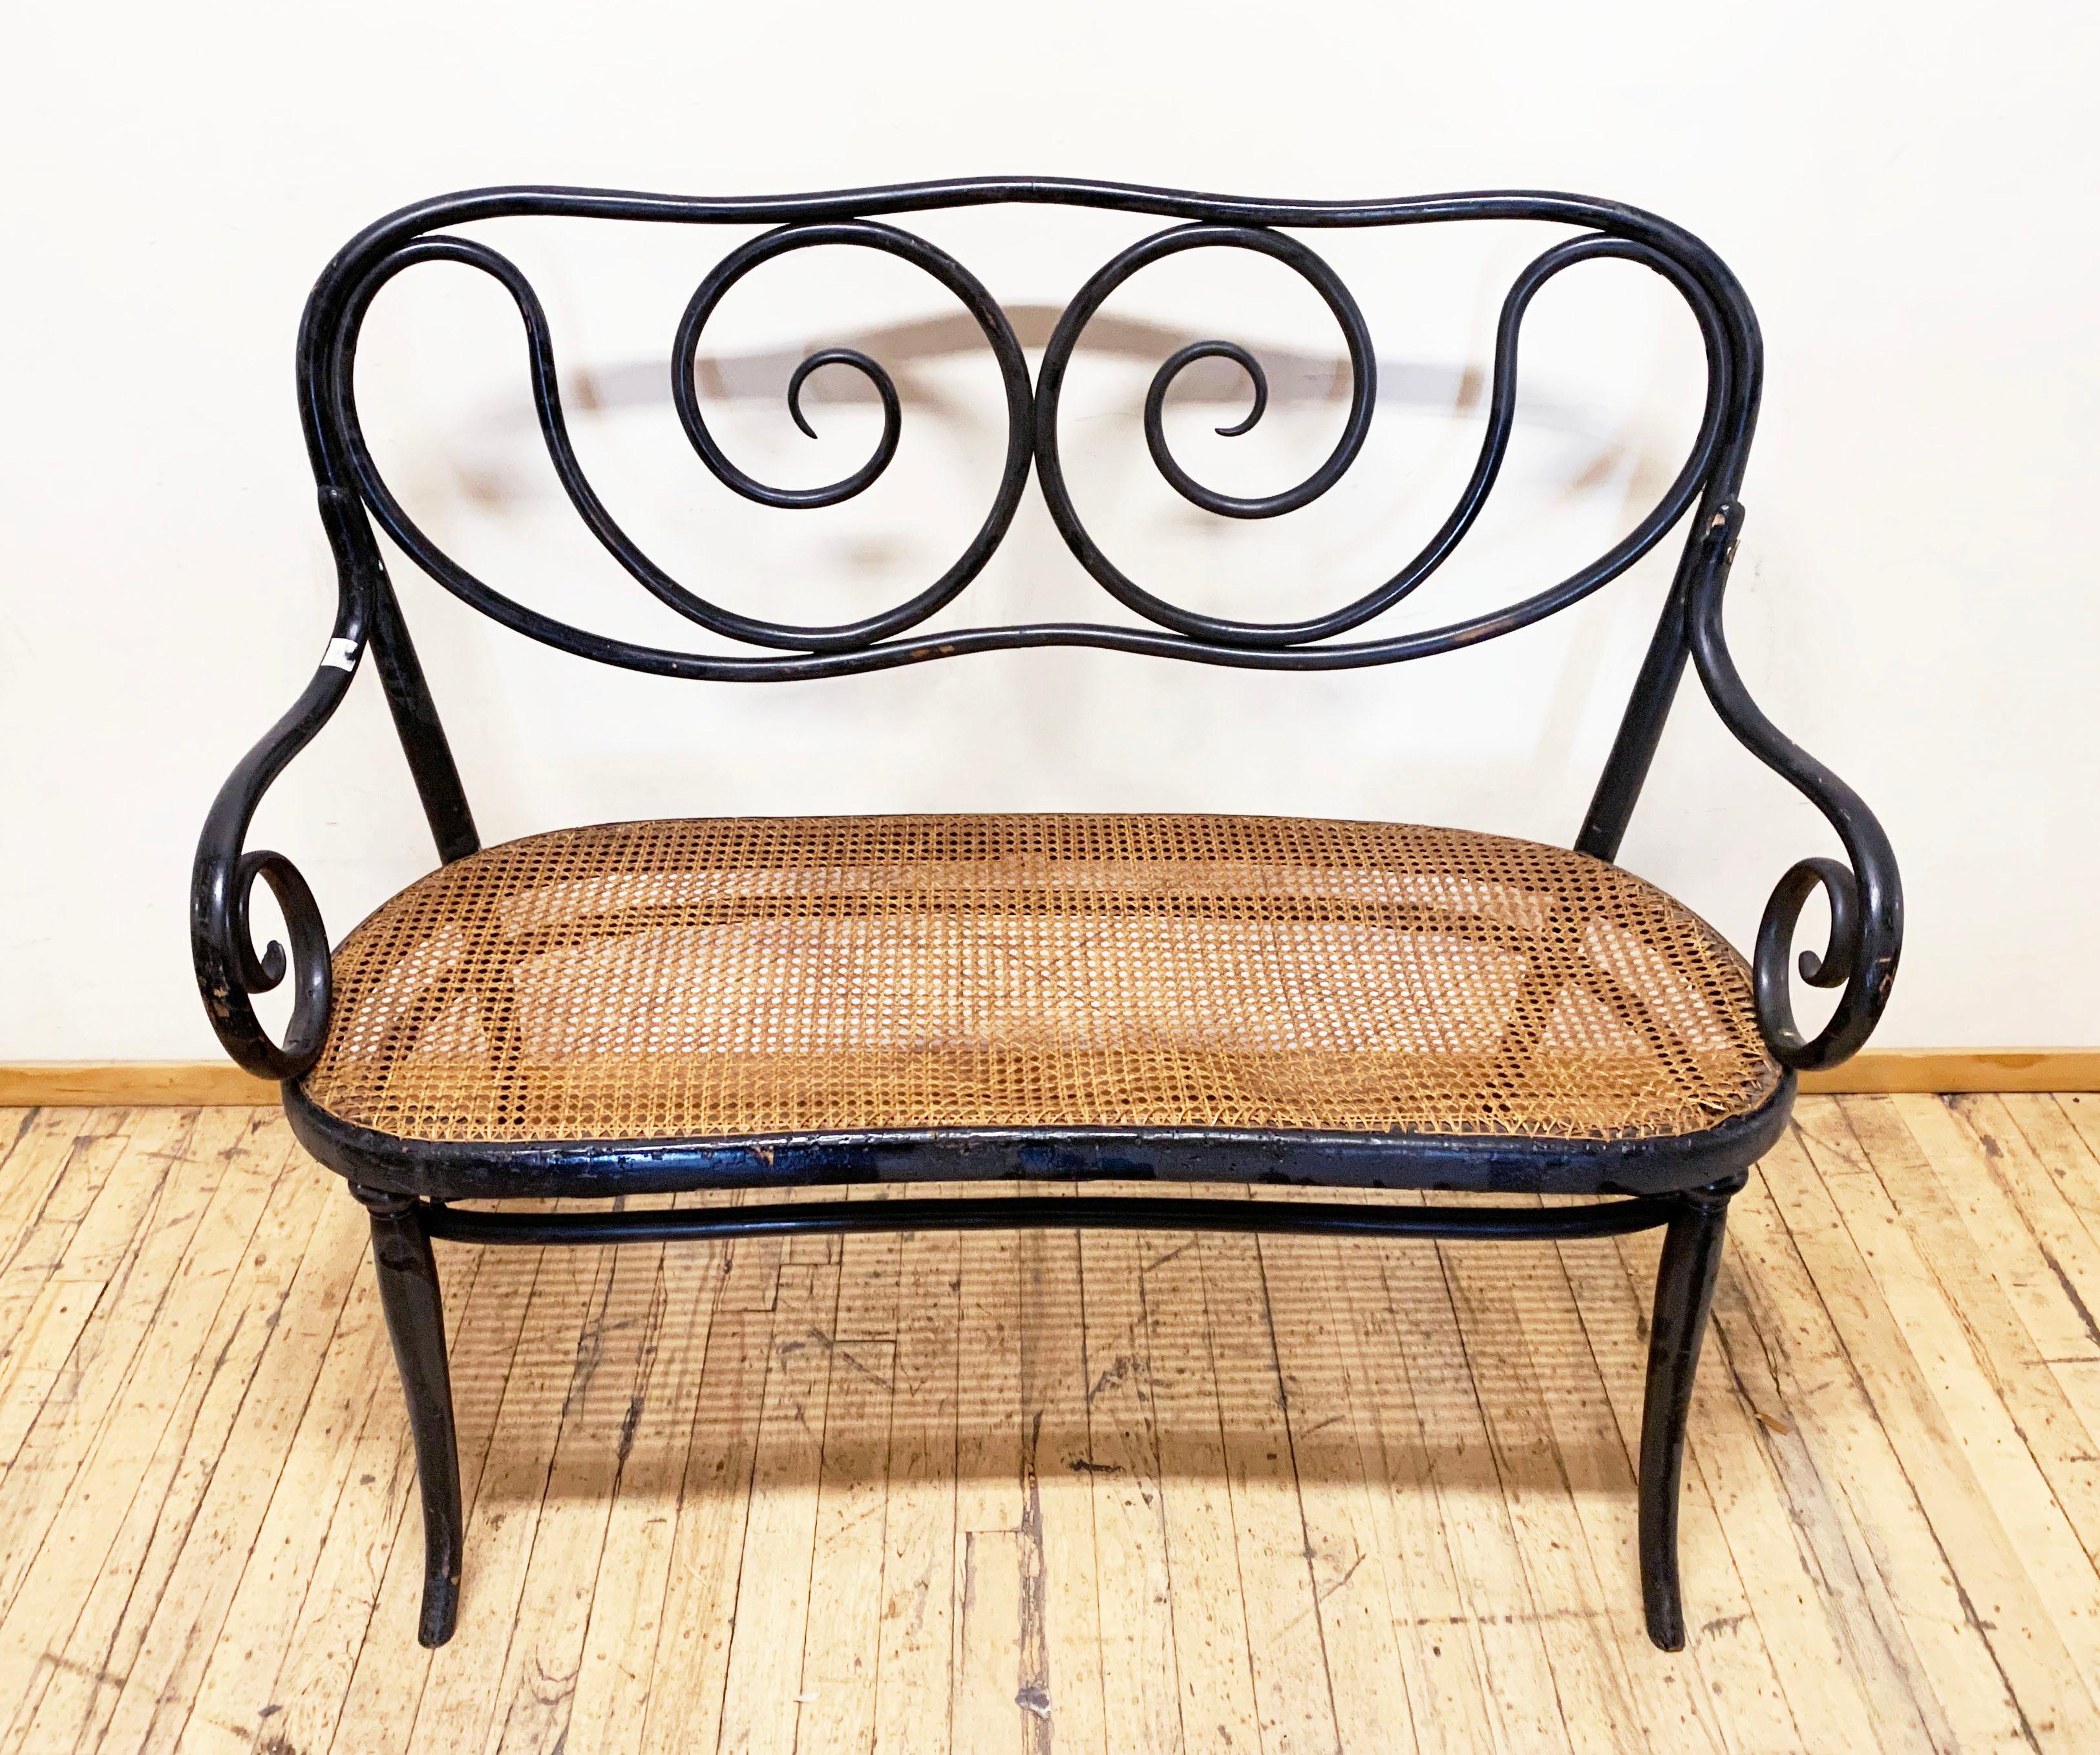 Beautiful Settee by Thonet and featured in their 1904 catalog. Most likely designed turn of the century (late 1800s).
This item does need to visit a restore wood shop for repair. The left arm has some issues that will need attention before use.